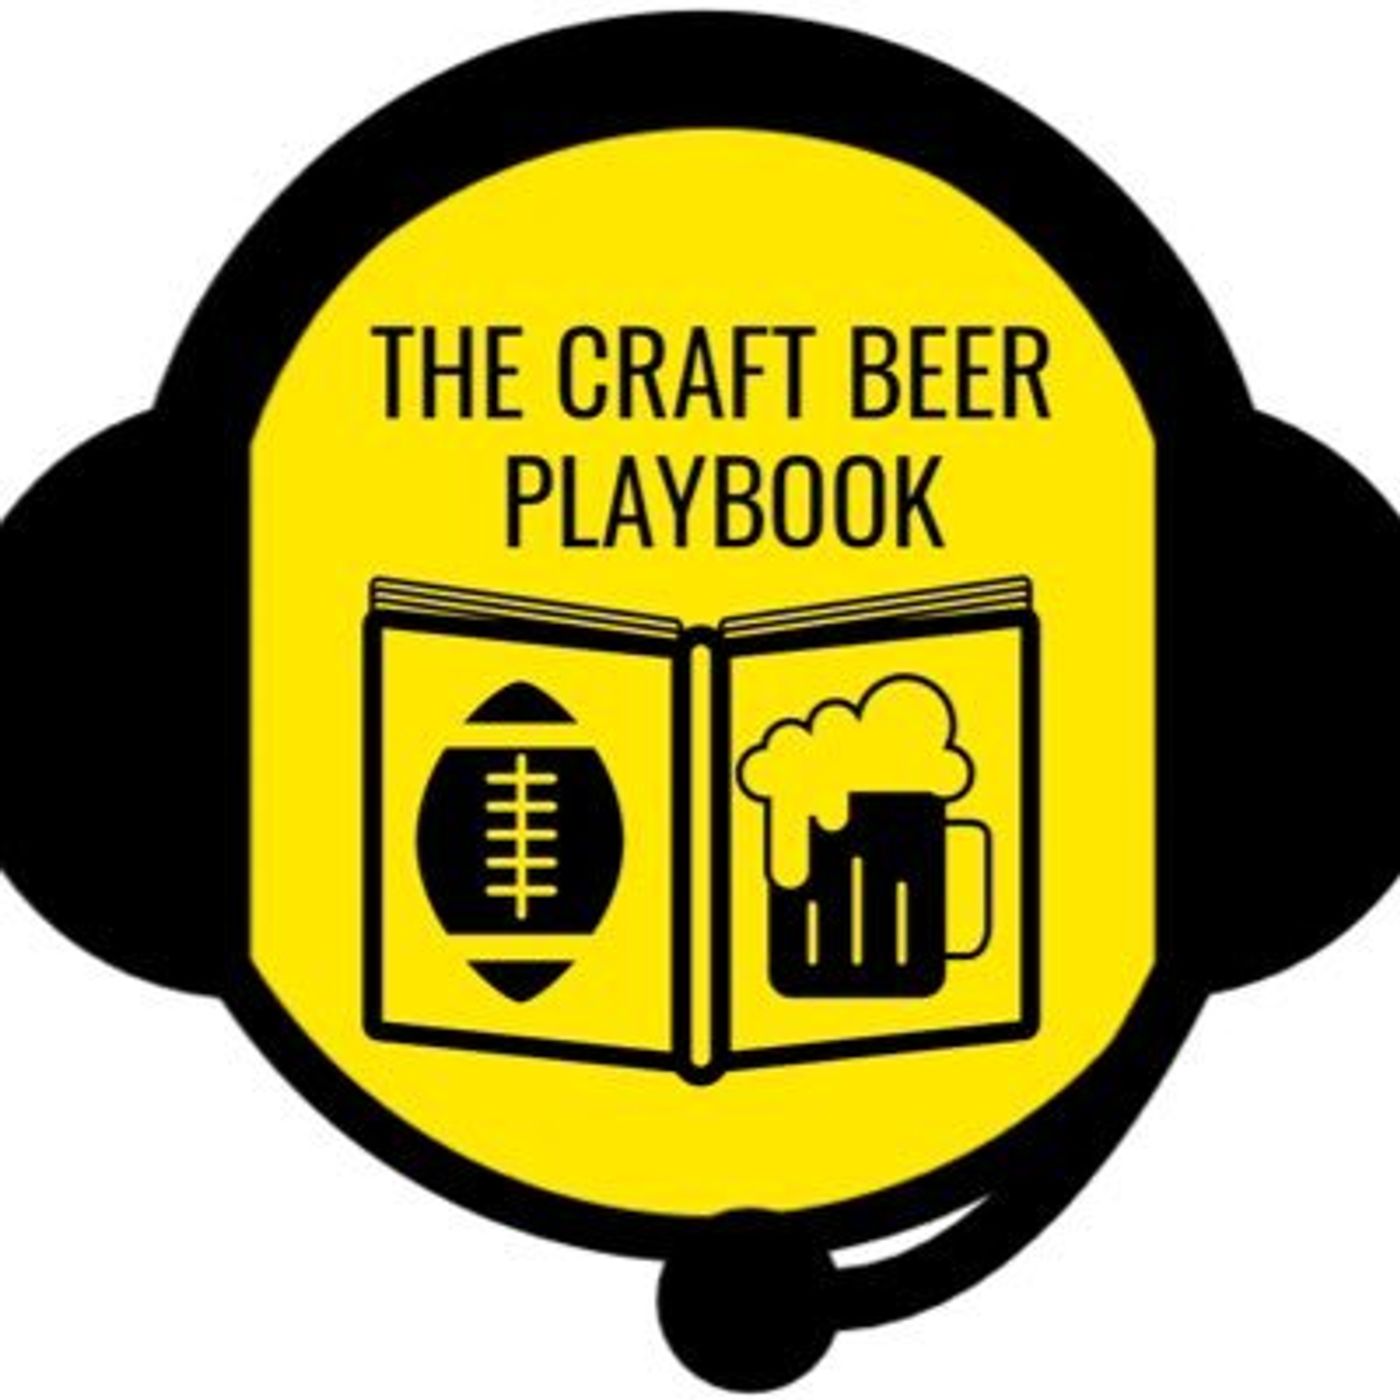 The Craft Beer Playbook: S2 E6 Bootleggers & Bolts/Panthers Playoffs